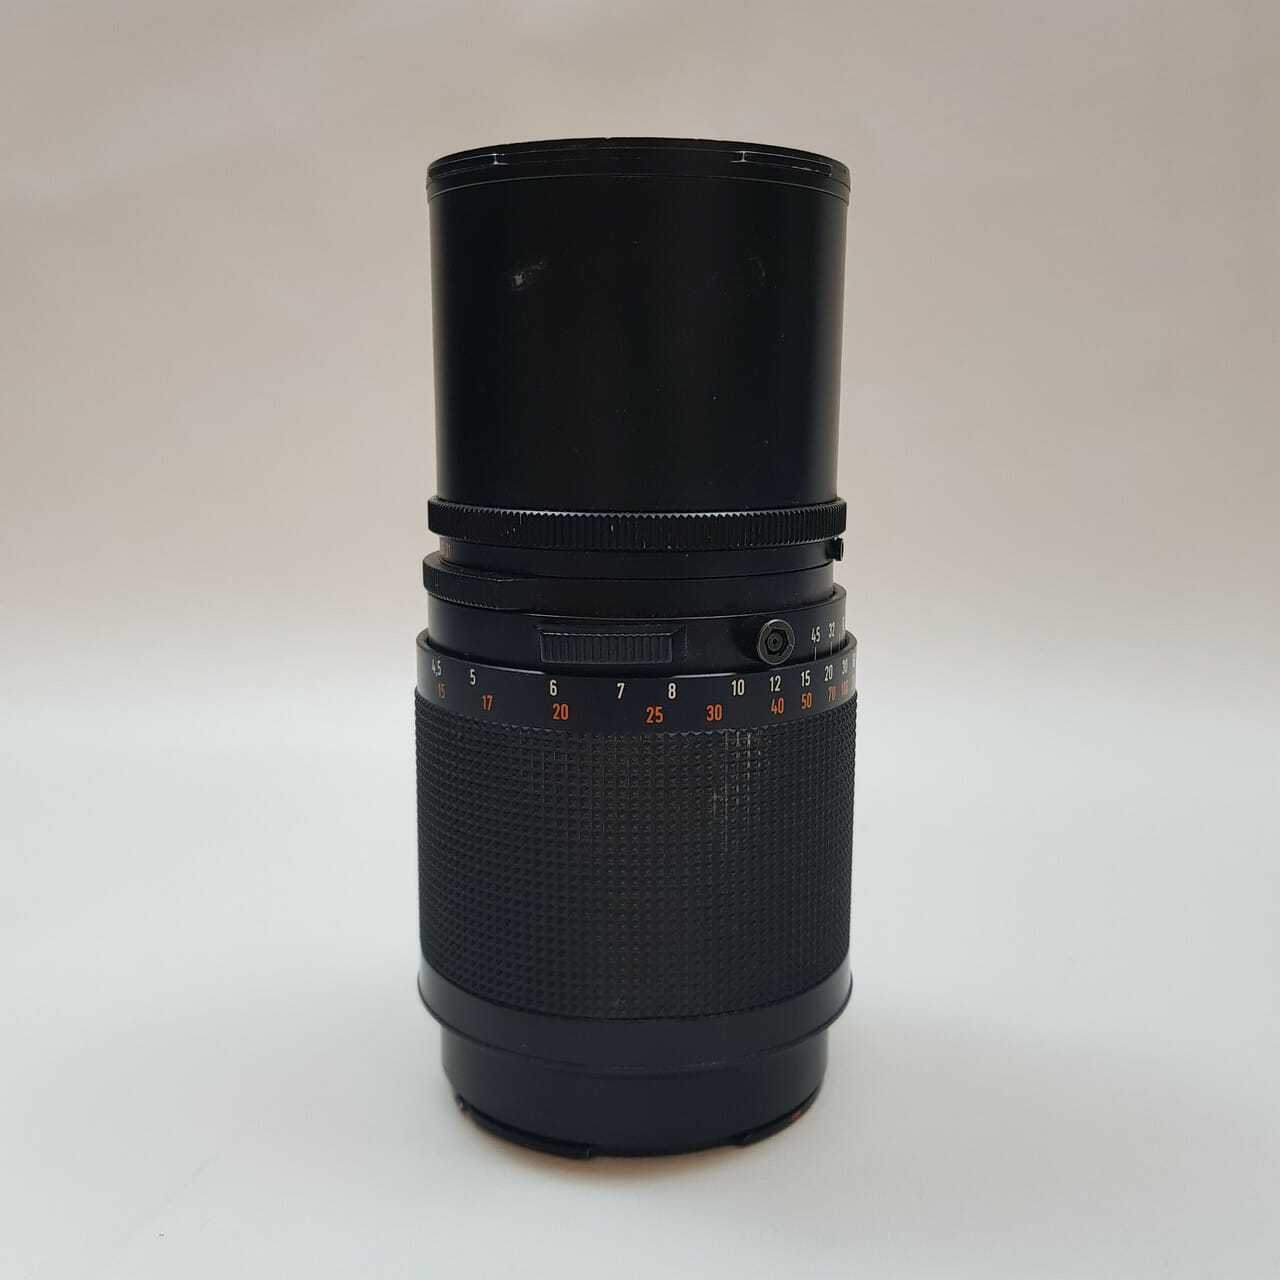 HASSELBLAD ZEISS SONNAR 250MM F/5.6 CF T* CAMERA LENS #53274